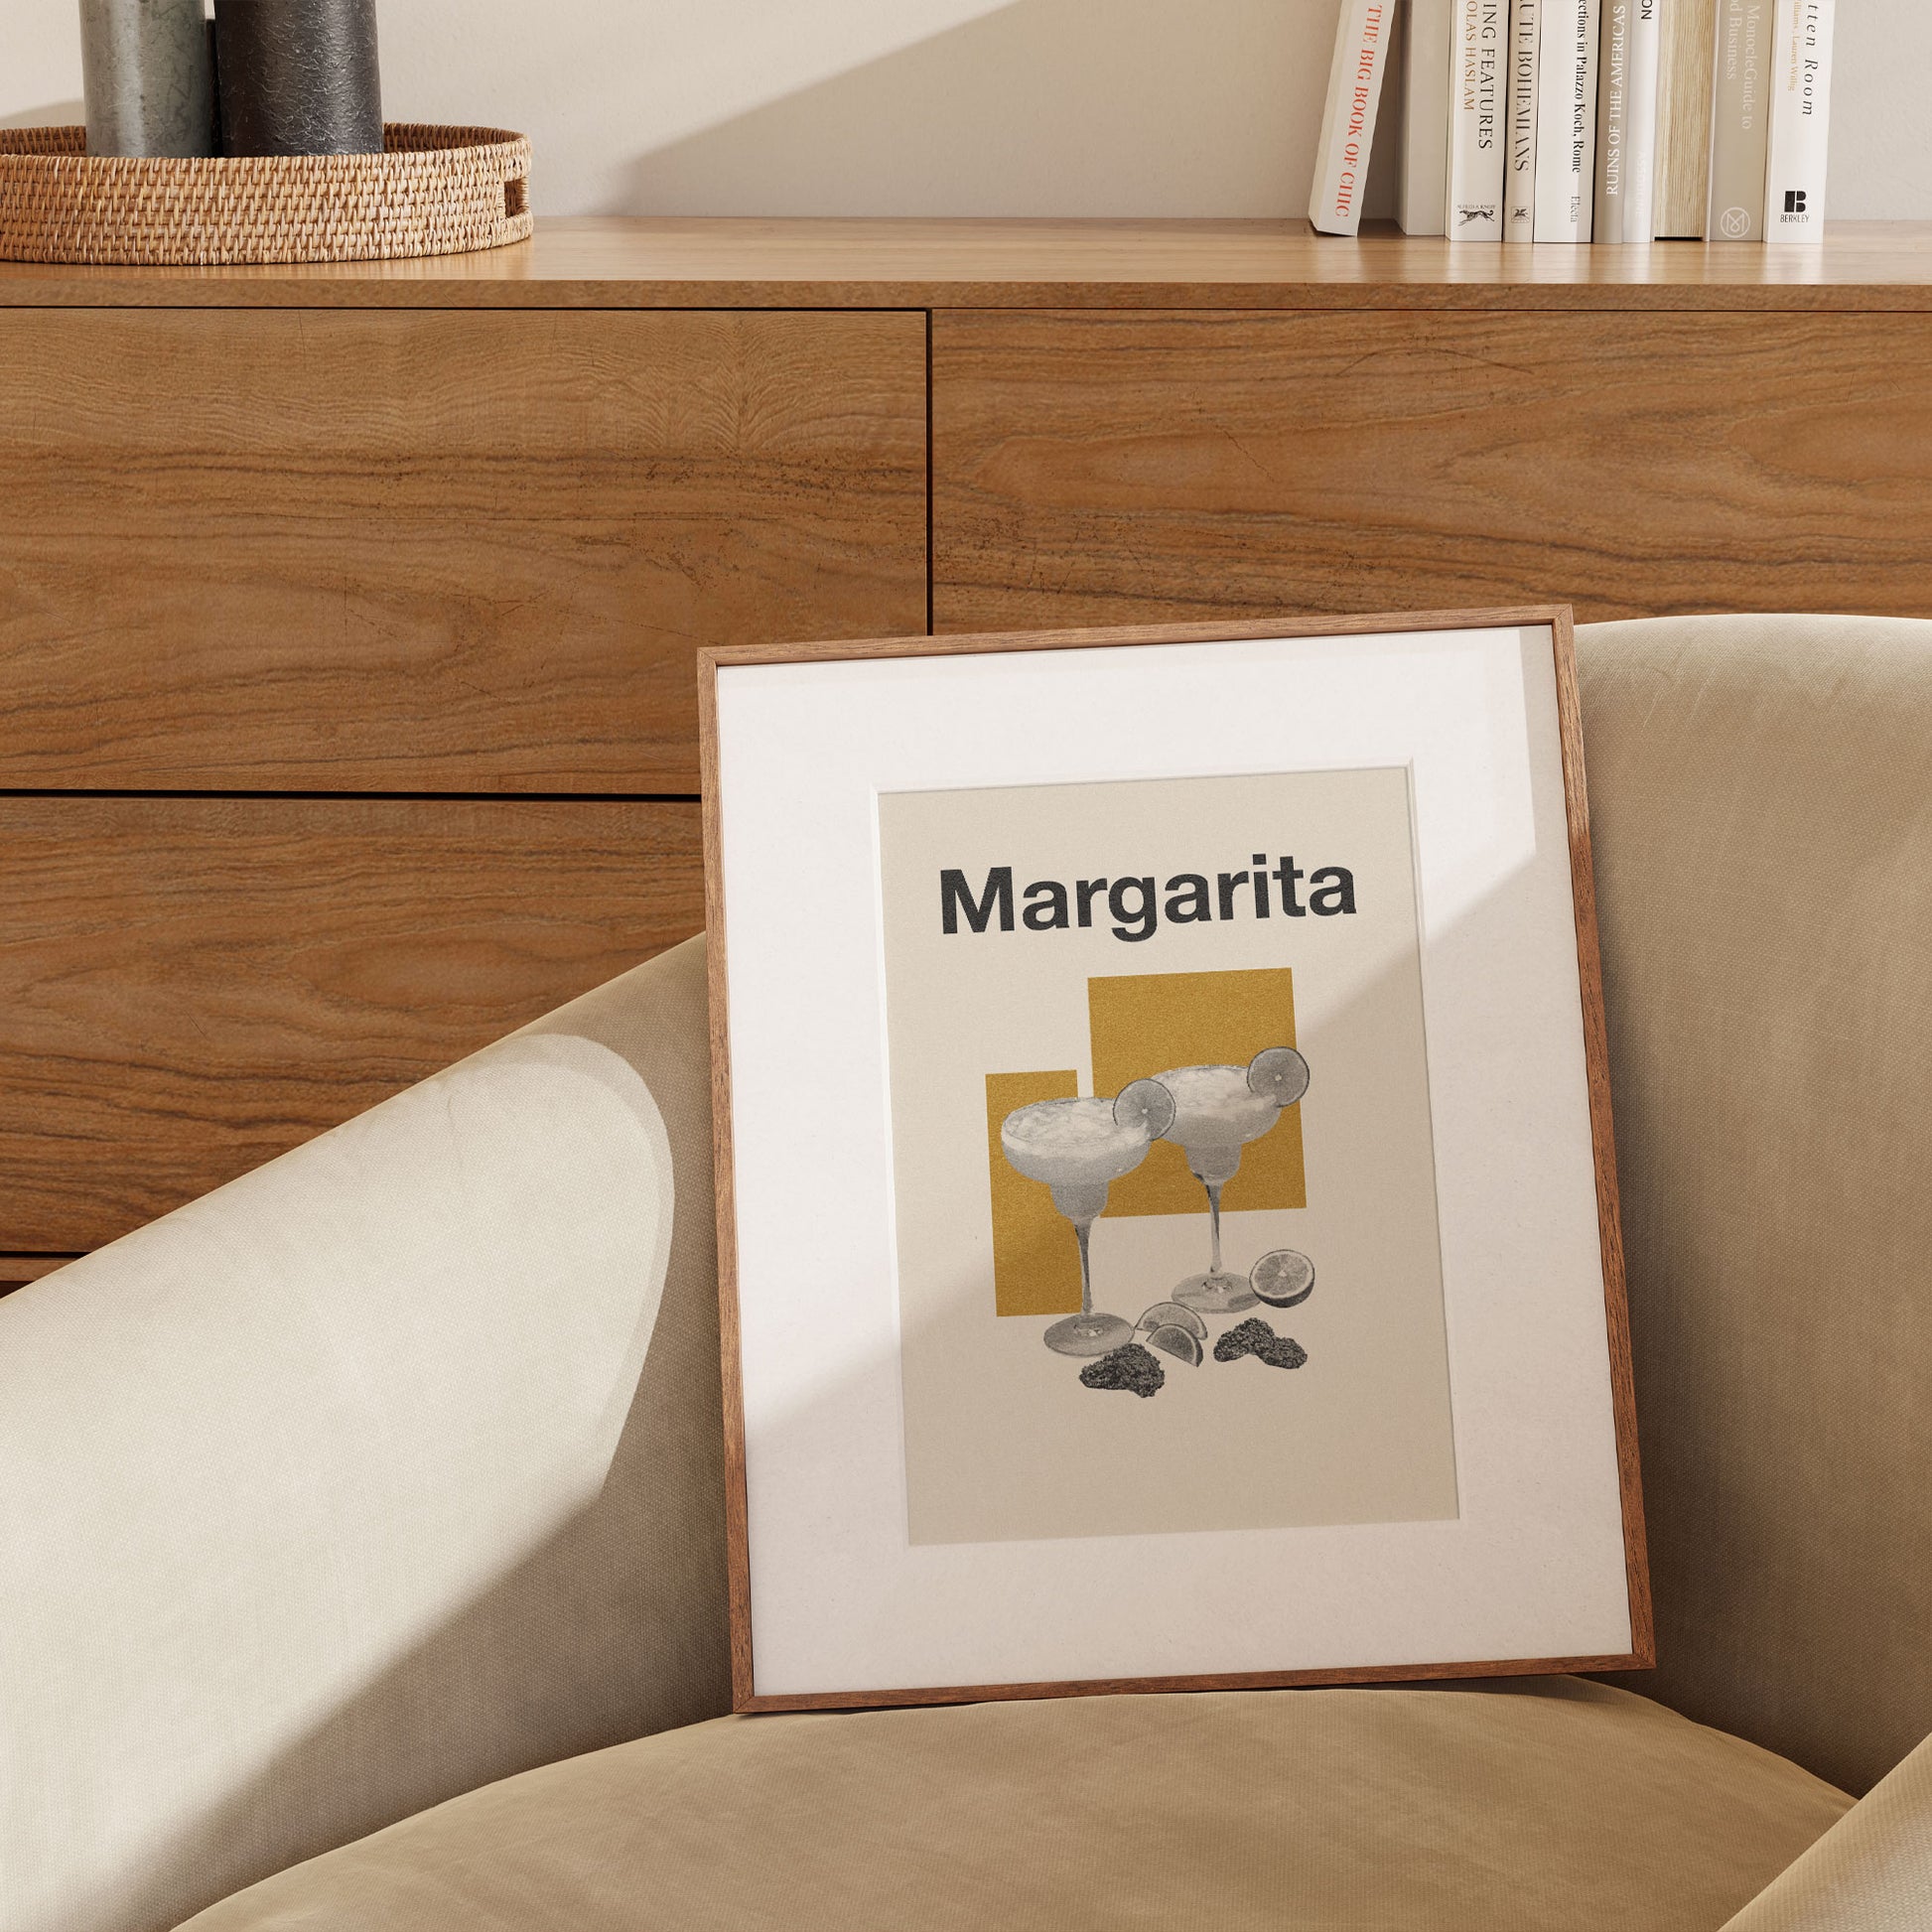 A Margarita cocktail poster by thewallflowerclub in a living room.